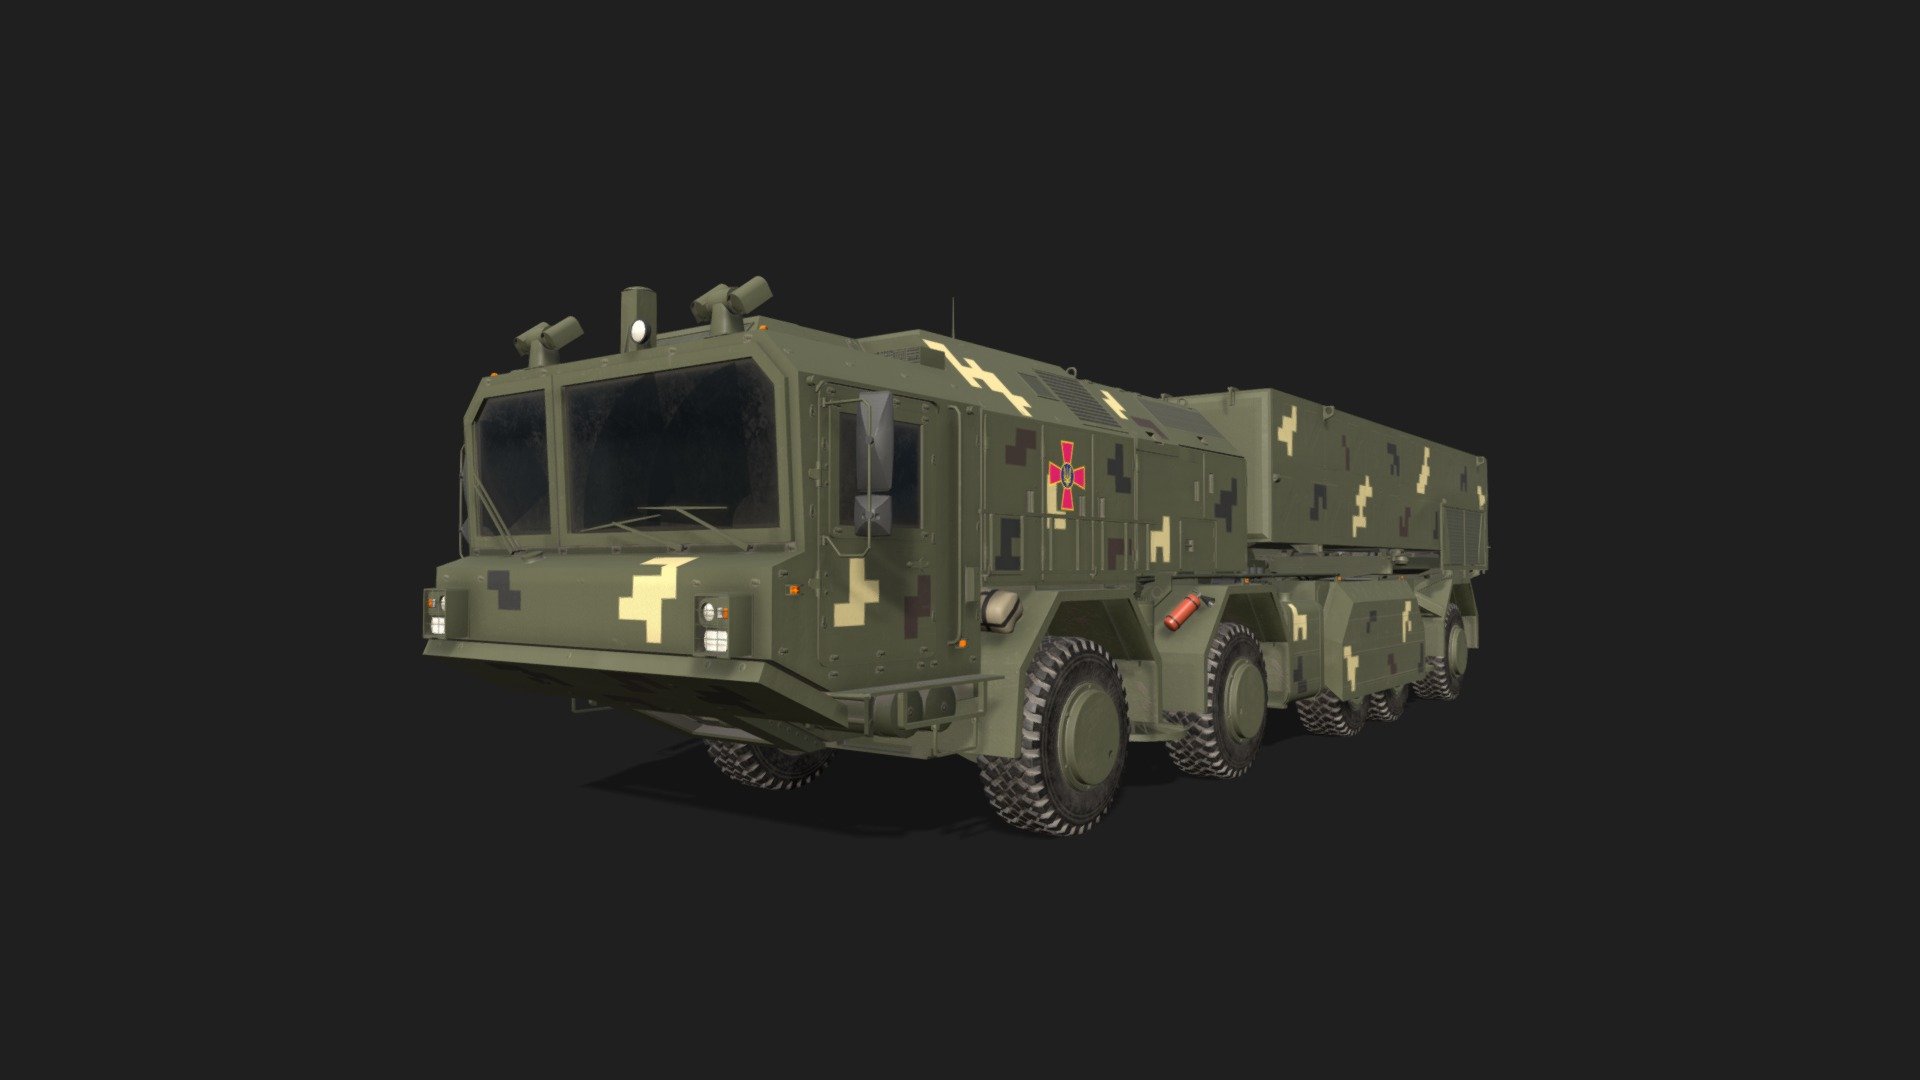 Sapsan (export name Grim-2) is new ukrainian missile system so there were very few images of this new weapon and no any technical drawings possible to find yet. I did my best to create 3d model as accurate as possible to real missile system.

Real world object based materials. Real measures. Model is built to real-world scale.




Height: 3.02 m;

Legth: 12.8 m;

Width: 2.94 m.

Mesh details:




Tris: 162826;

Vertices: 87558.


Textures: PBR textures of metal/rough contains texture set 4096x4096 (Basecolor, Normal, Metallic, Roughness, AO)




4096x4096 for Cabin



4096x4096 for Chassis

4096x4096 for Frame

4096x4096 for Launcher

2048x2048 for Wheels
 - Sapsan Grim-2 Ukrainian military missile system - 3D model by On3_Danq_Boi 3d model